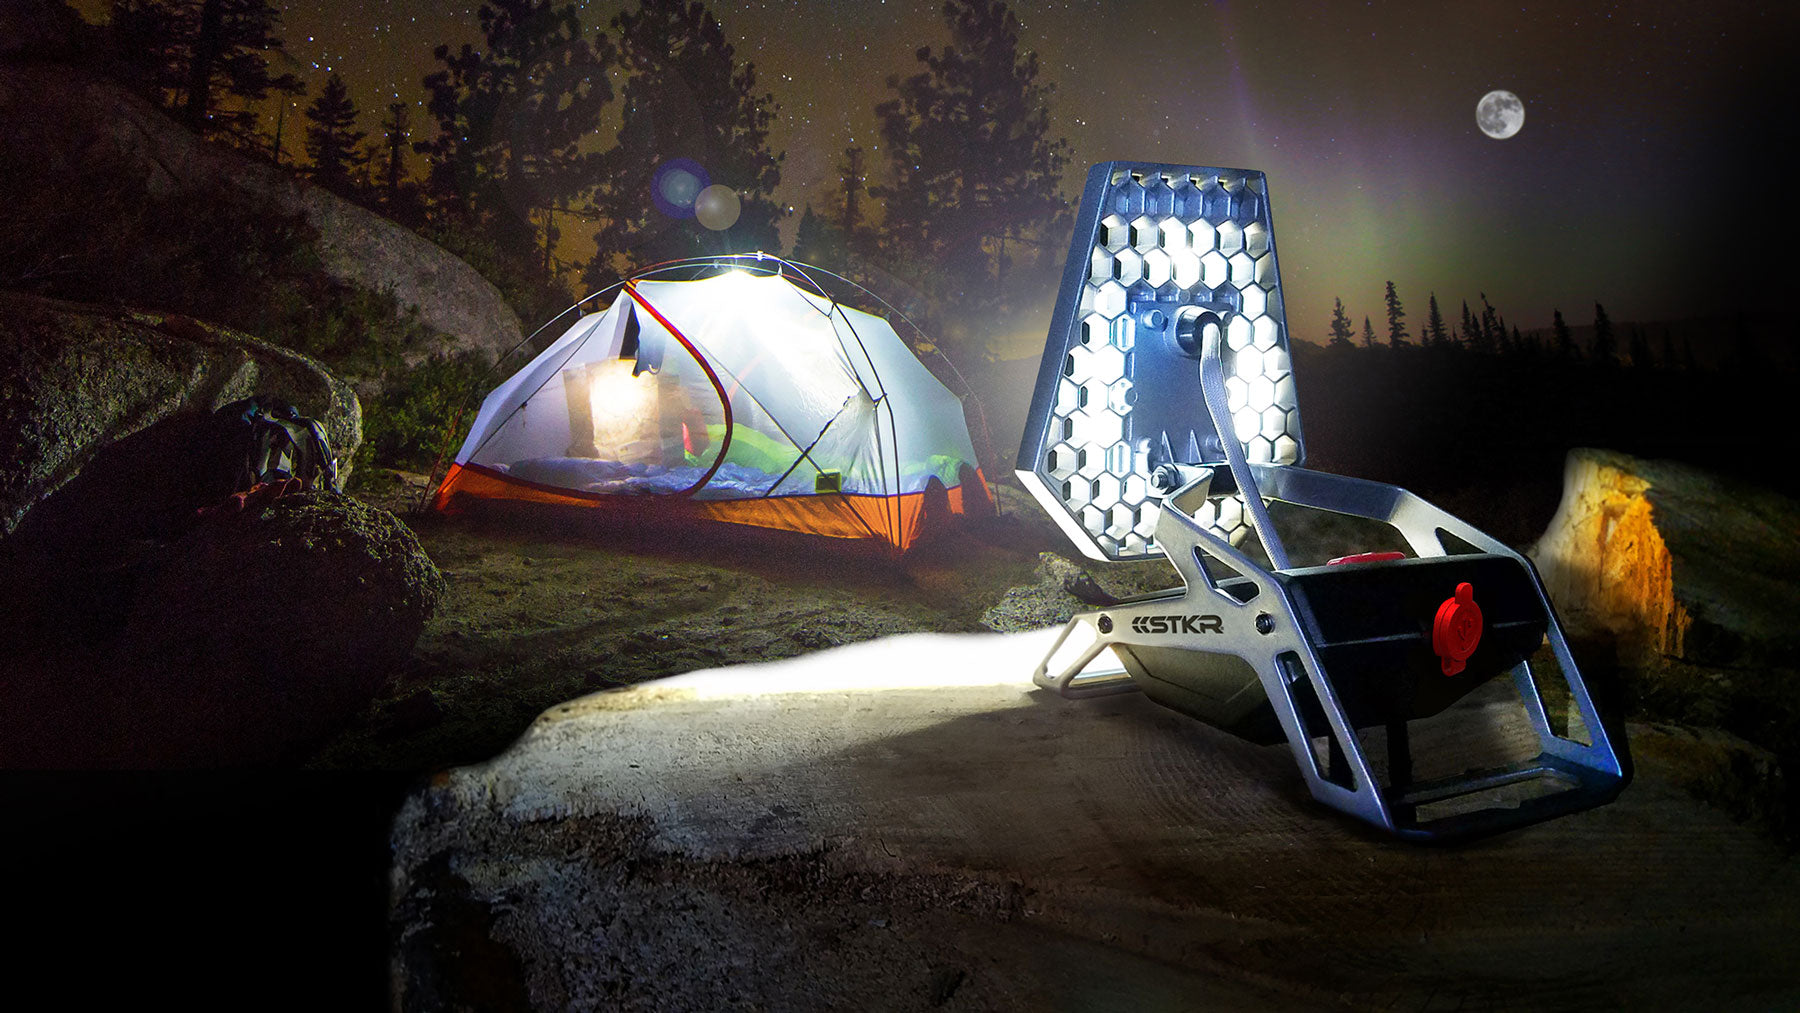 night time mountainous camping scene featuring a mobile task light illuminating a tent camp spot.